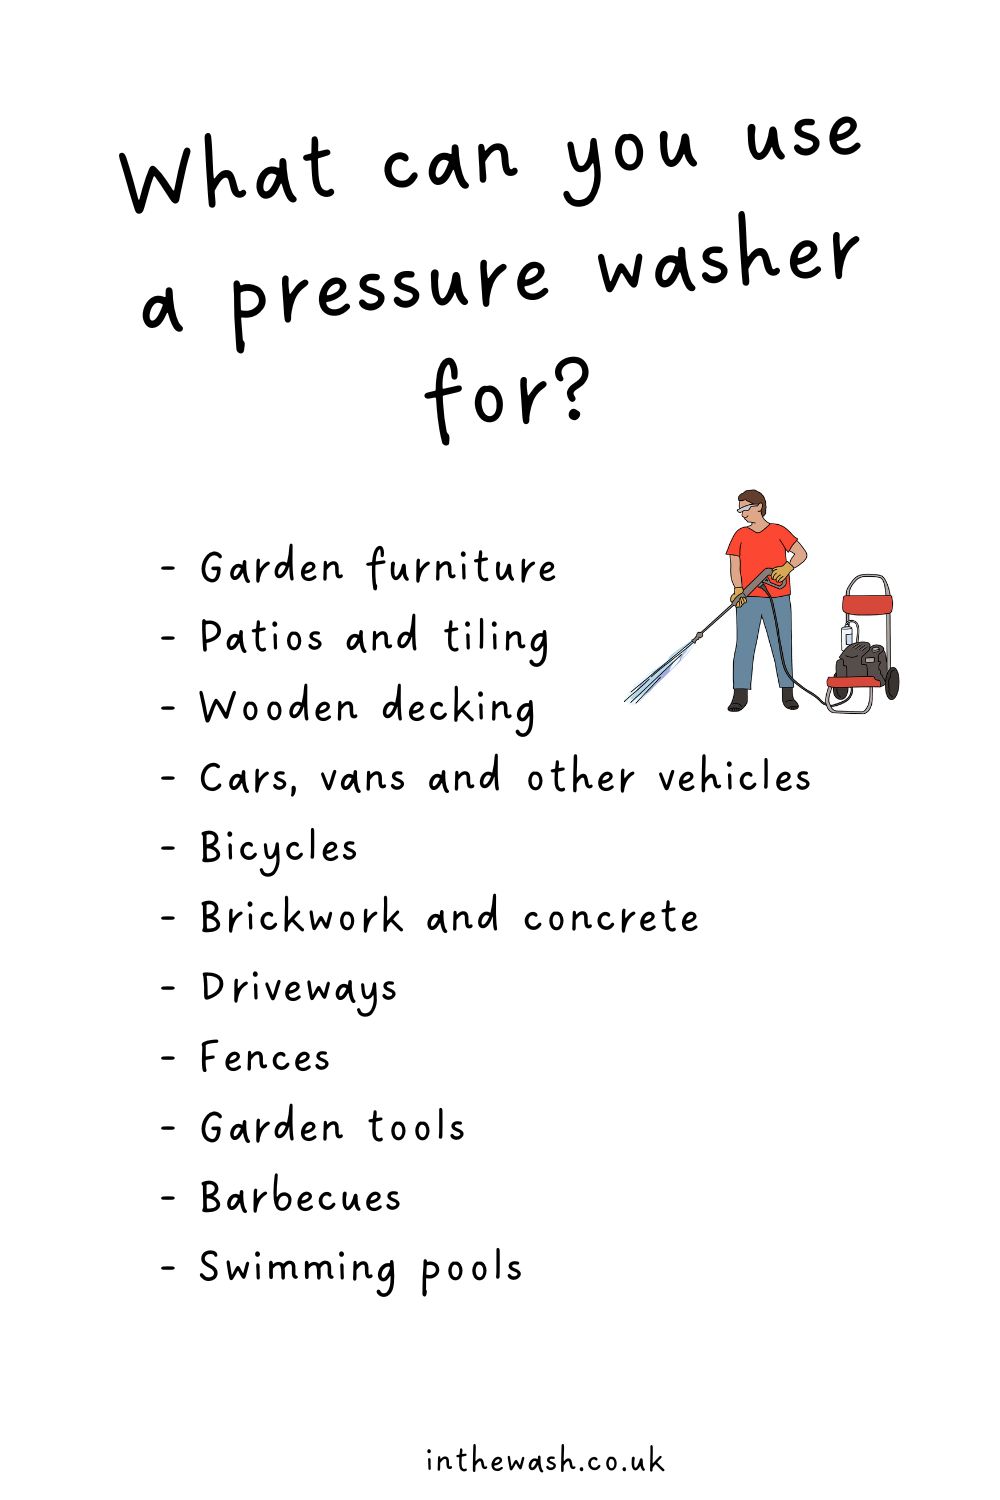 What can you use a pressure washer for?